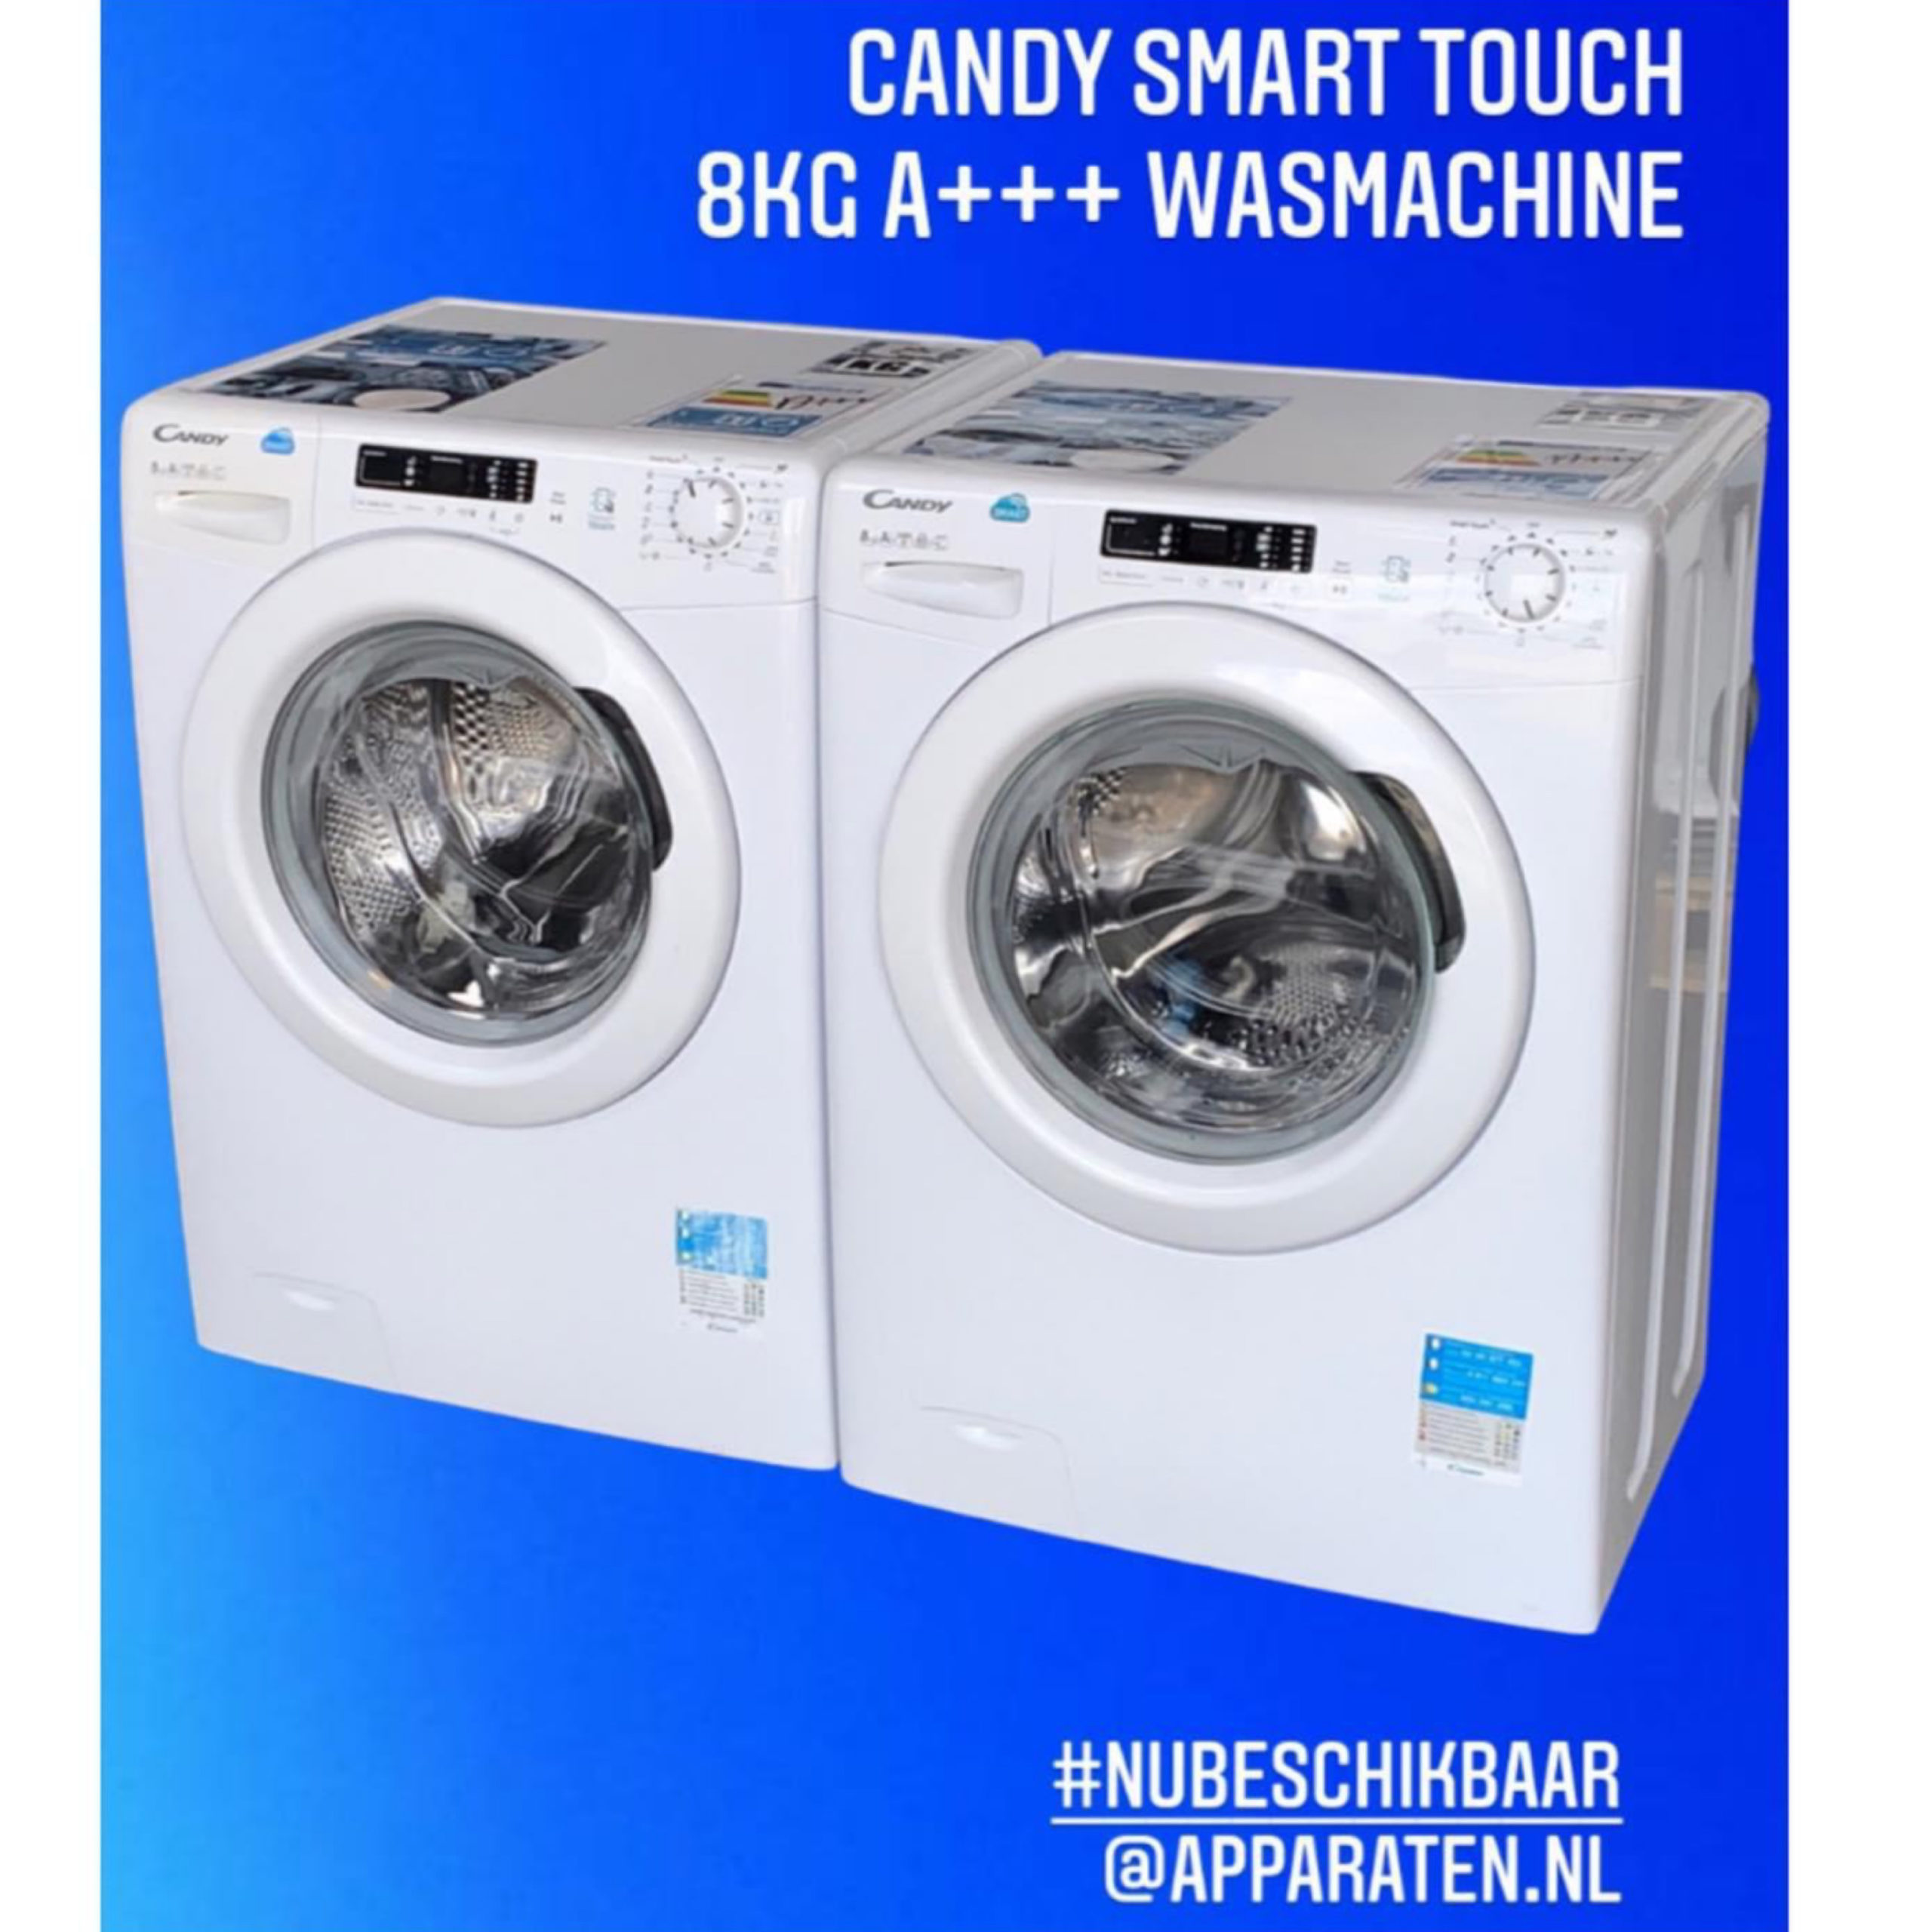 CANDY SMART TOUCH 8kg A+++ Wasmachine